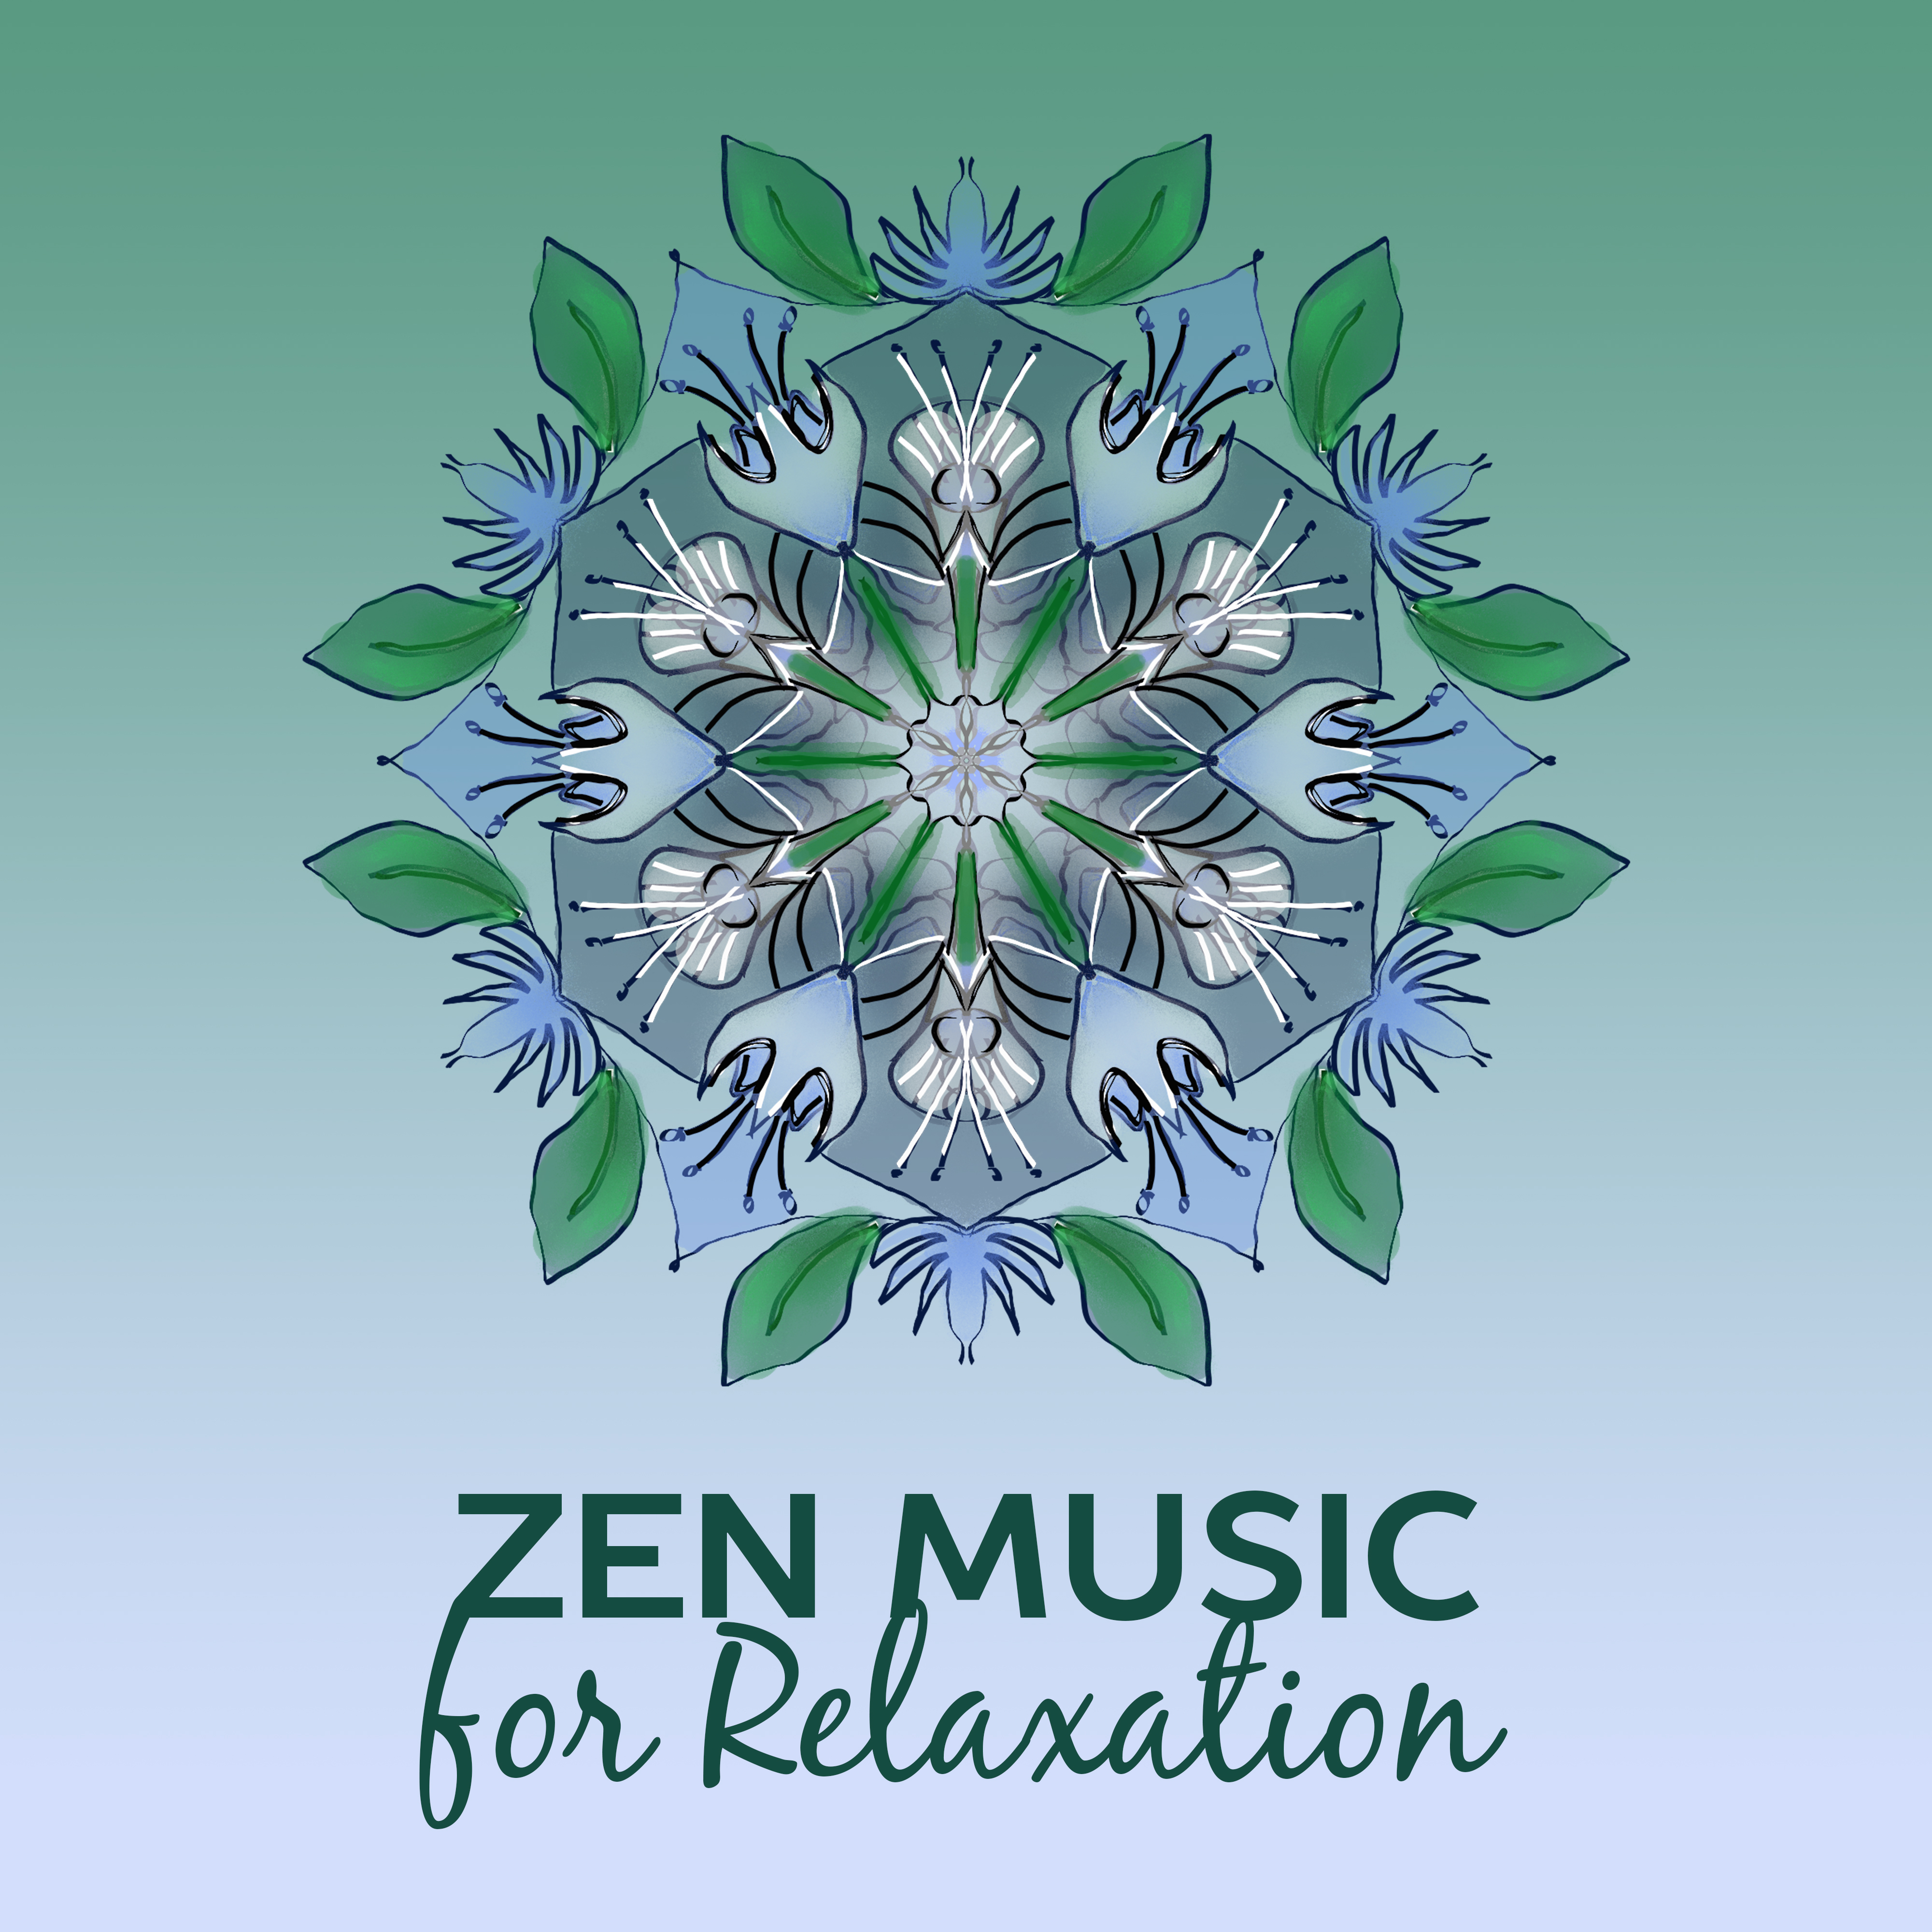 Zen Music for Relaxation  Nature Sounds for Meditation, Rest, Sleep: Rain, Waves, Birds, Inner Harmony, Peaceful Mind